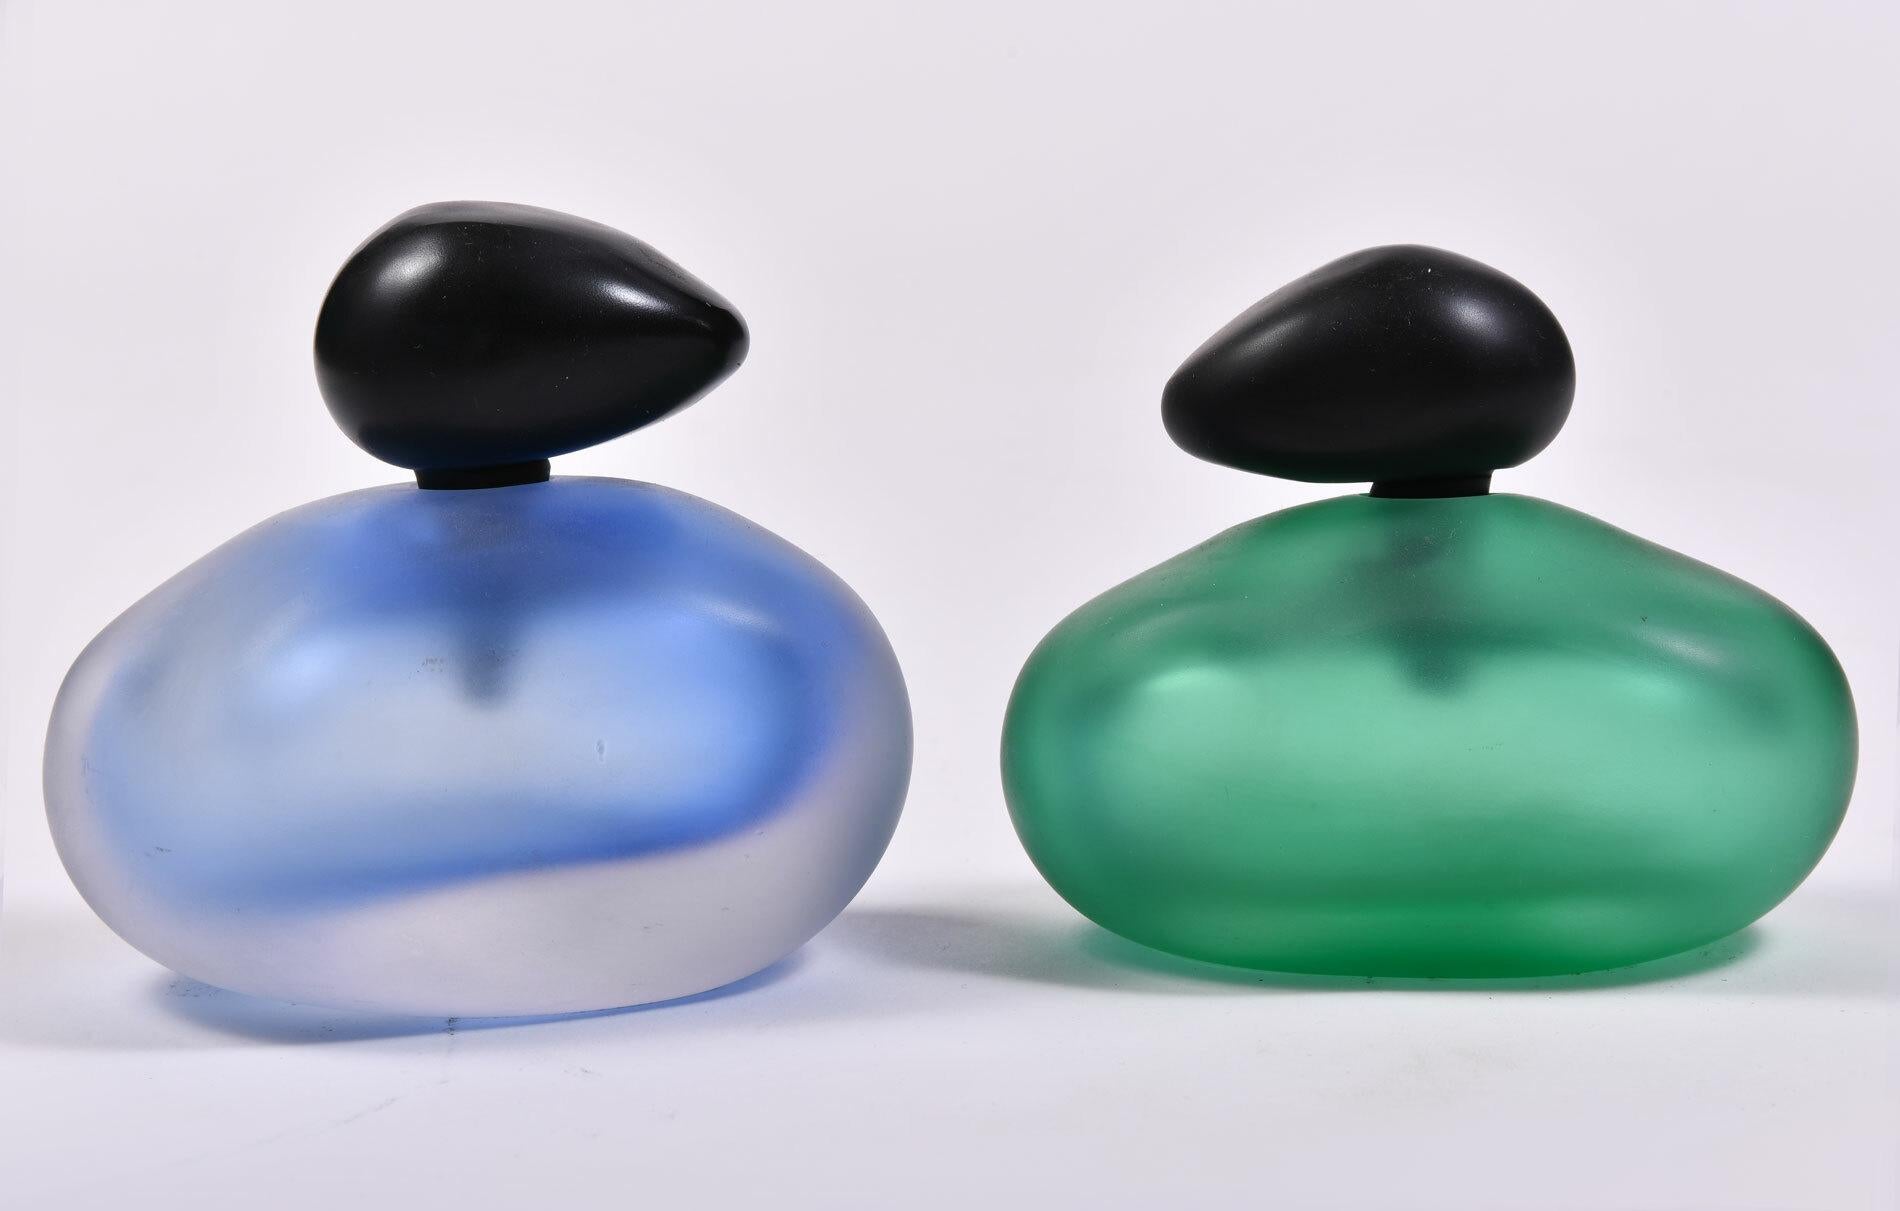 Organic stone shaped pair of blue and green Murano perfume bottles with black glass stoppers.